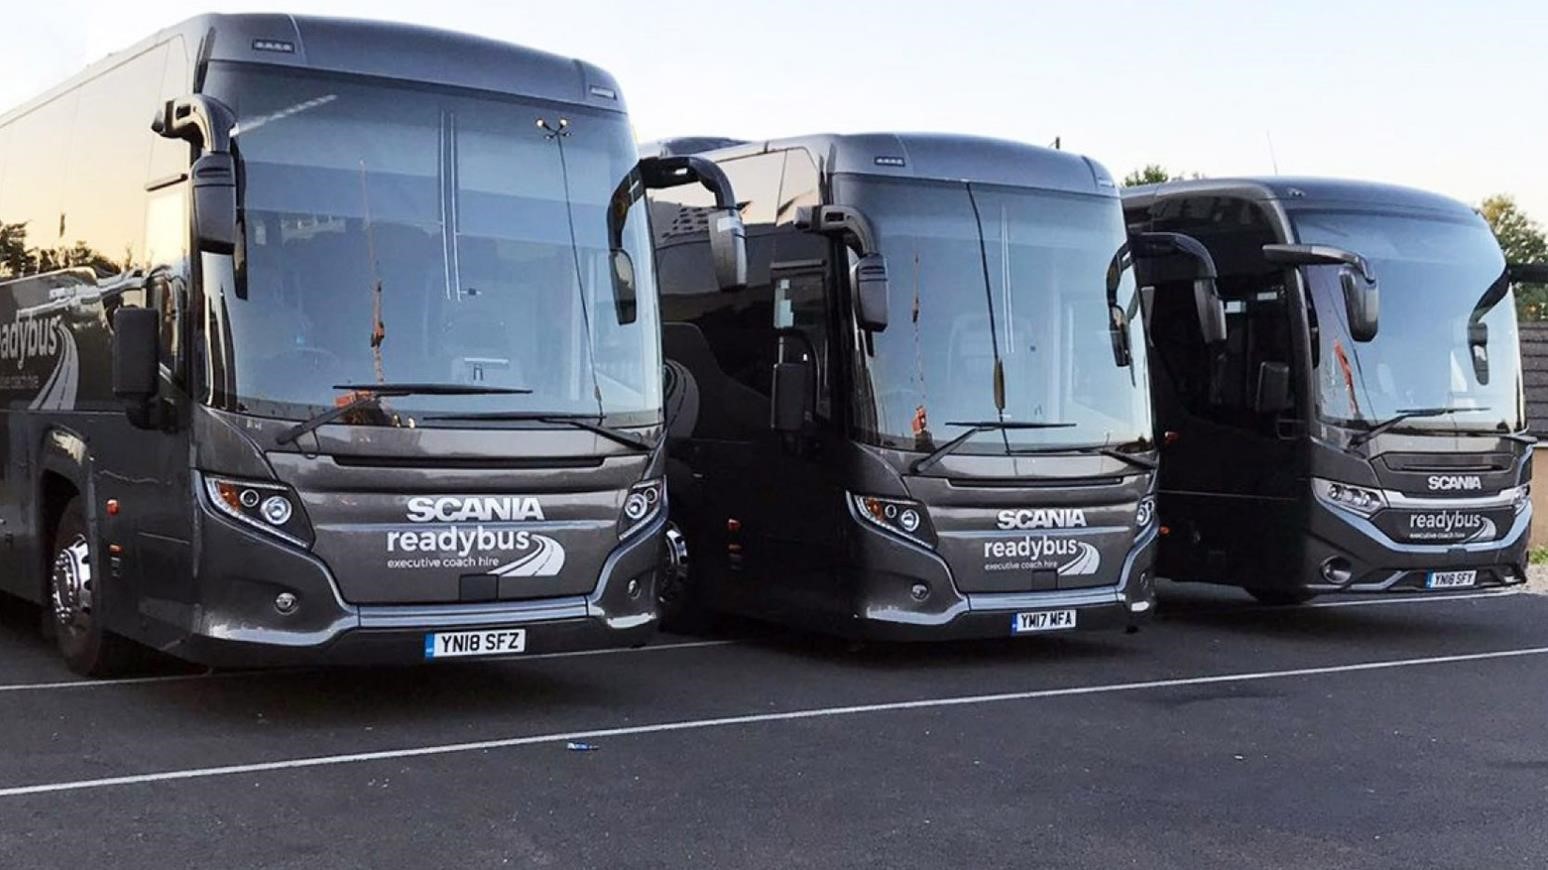 ReadyBus Limited Buys Five Scania Coaches, Including Interlink HD & Touring HD Models